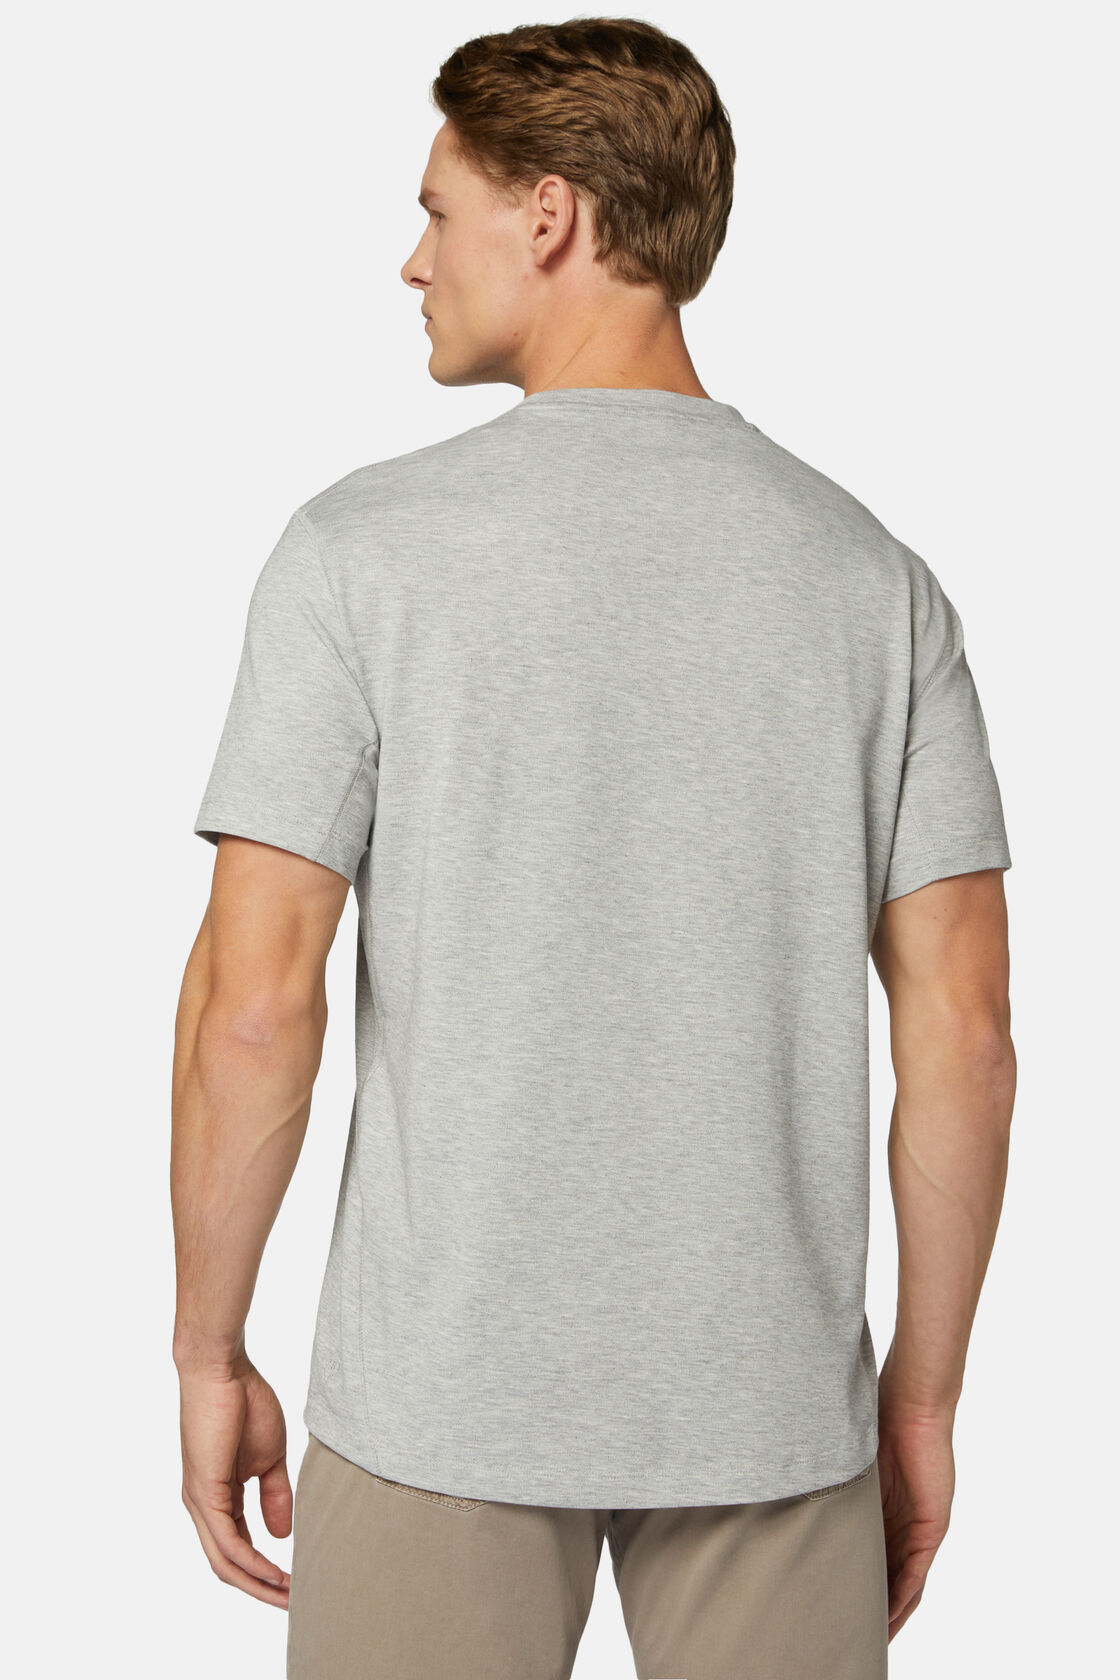 T-Shirt in Sustainable Performance Pique, Grey, hi-res